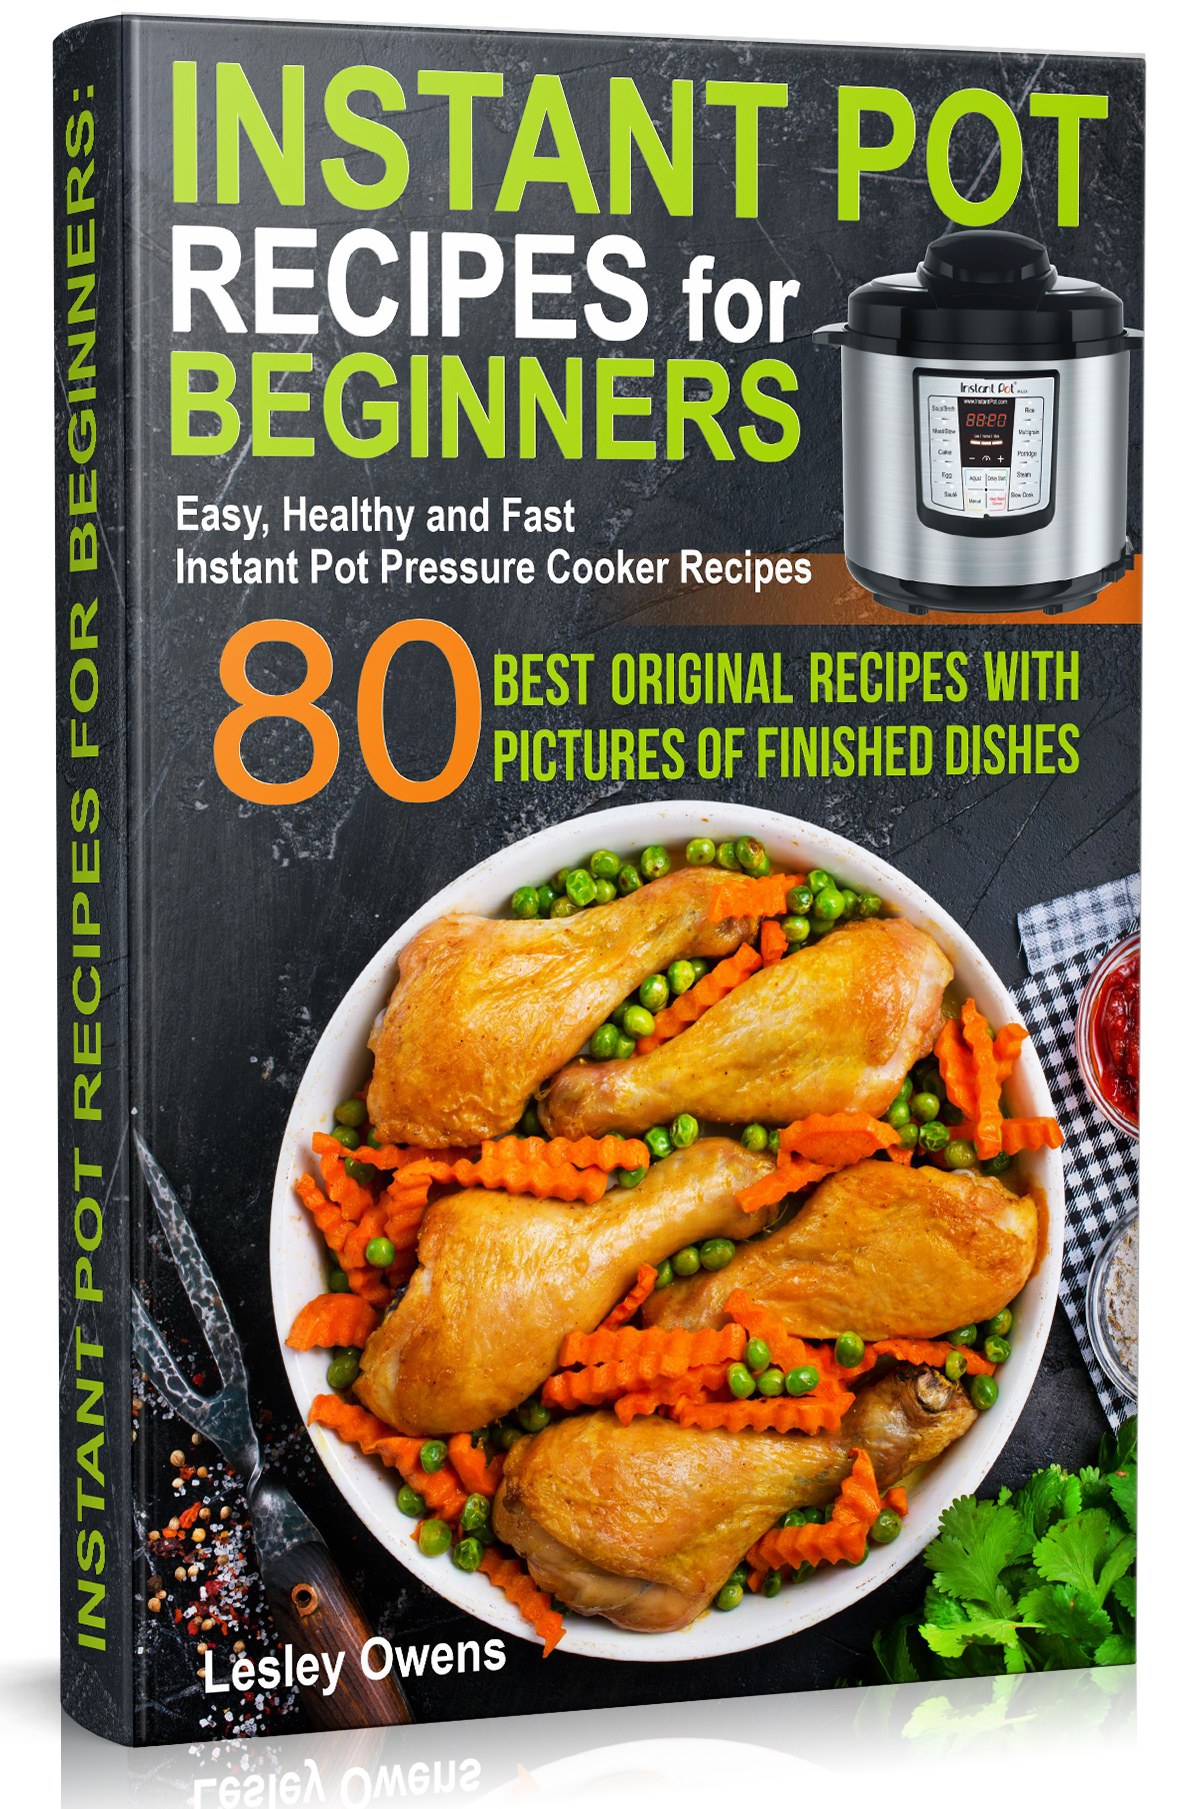 FREE: Instant Pot Recipes for Beginners: 80 BEST ORIGINAL RECIPES WITH PICTURES OF FINISHED DISHES (Easy, Healthy and Fast Instant Pot Pressure Cooker Recipes) by Lesley Owens